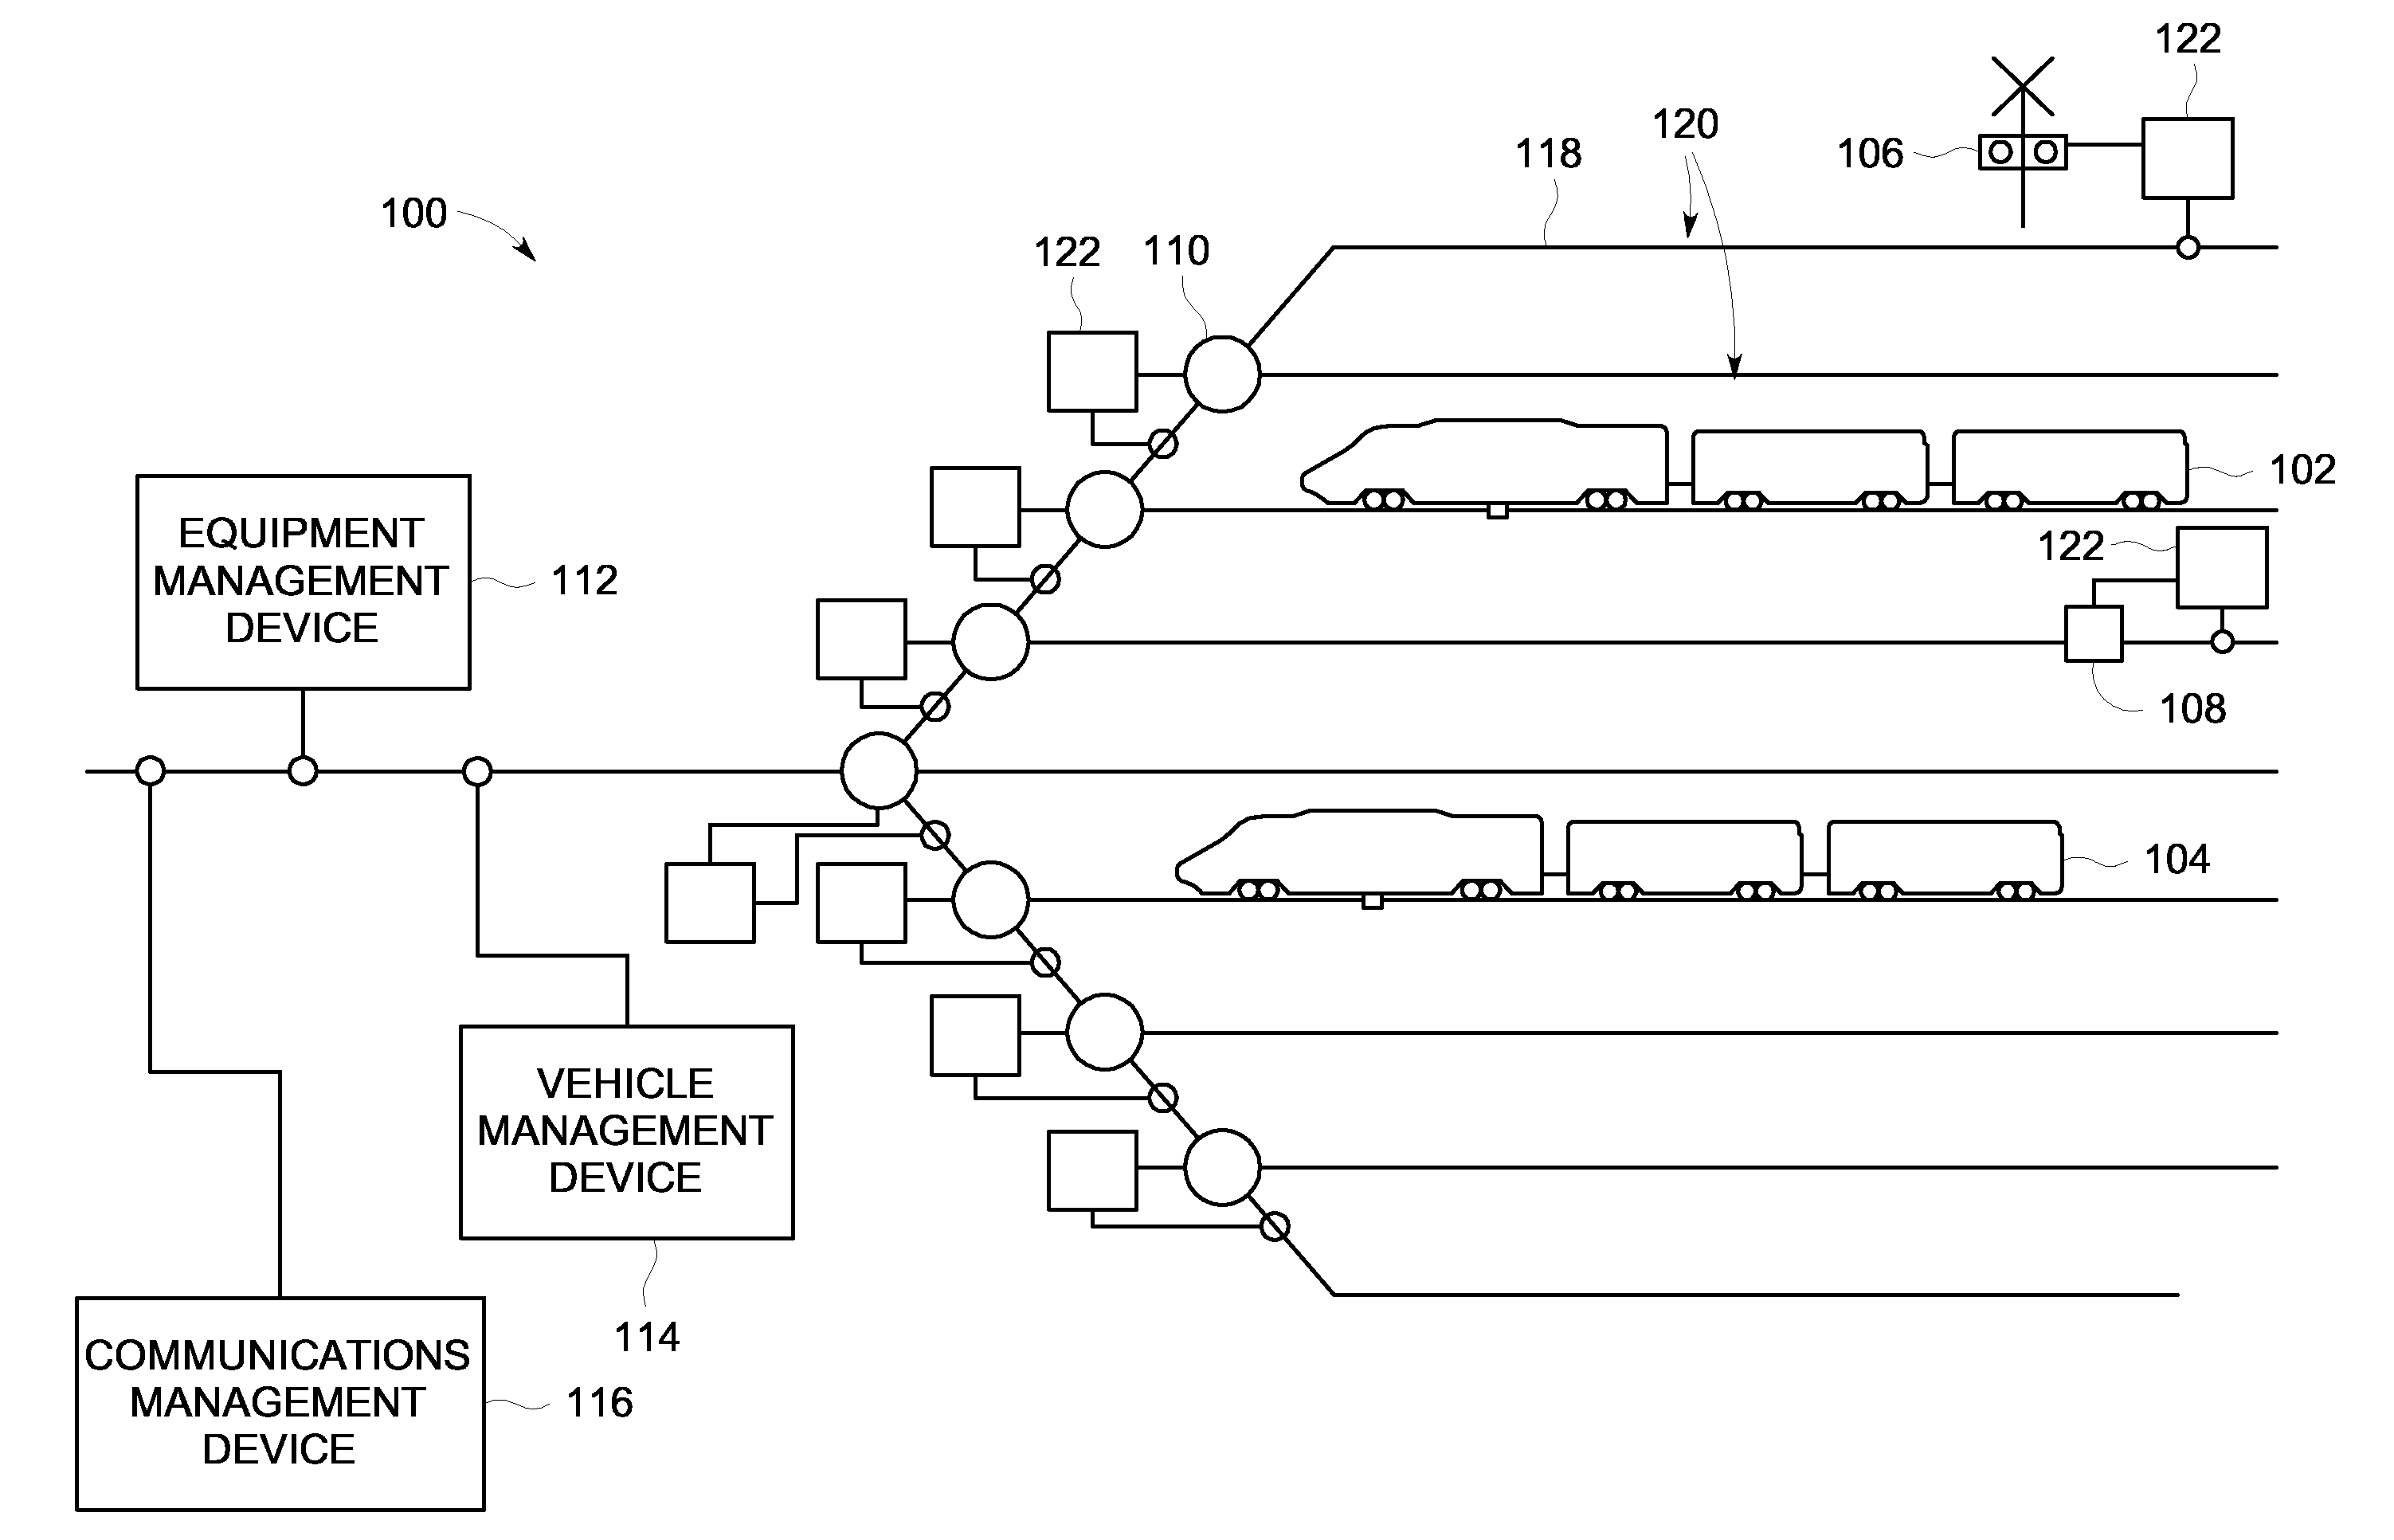 Rail appliance communication system and method for communicating with a rail appliance